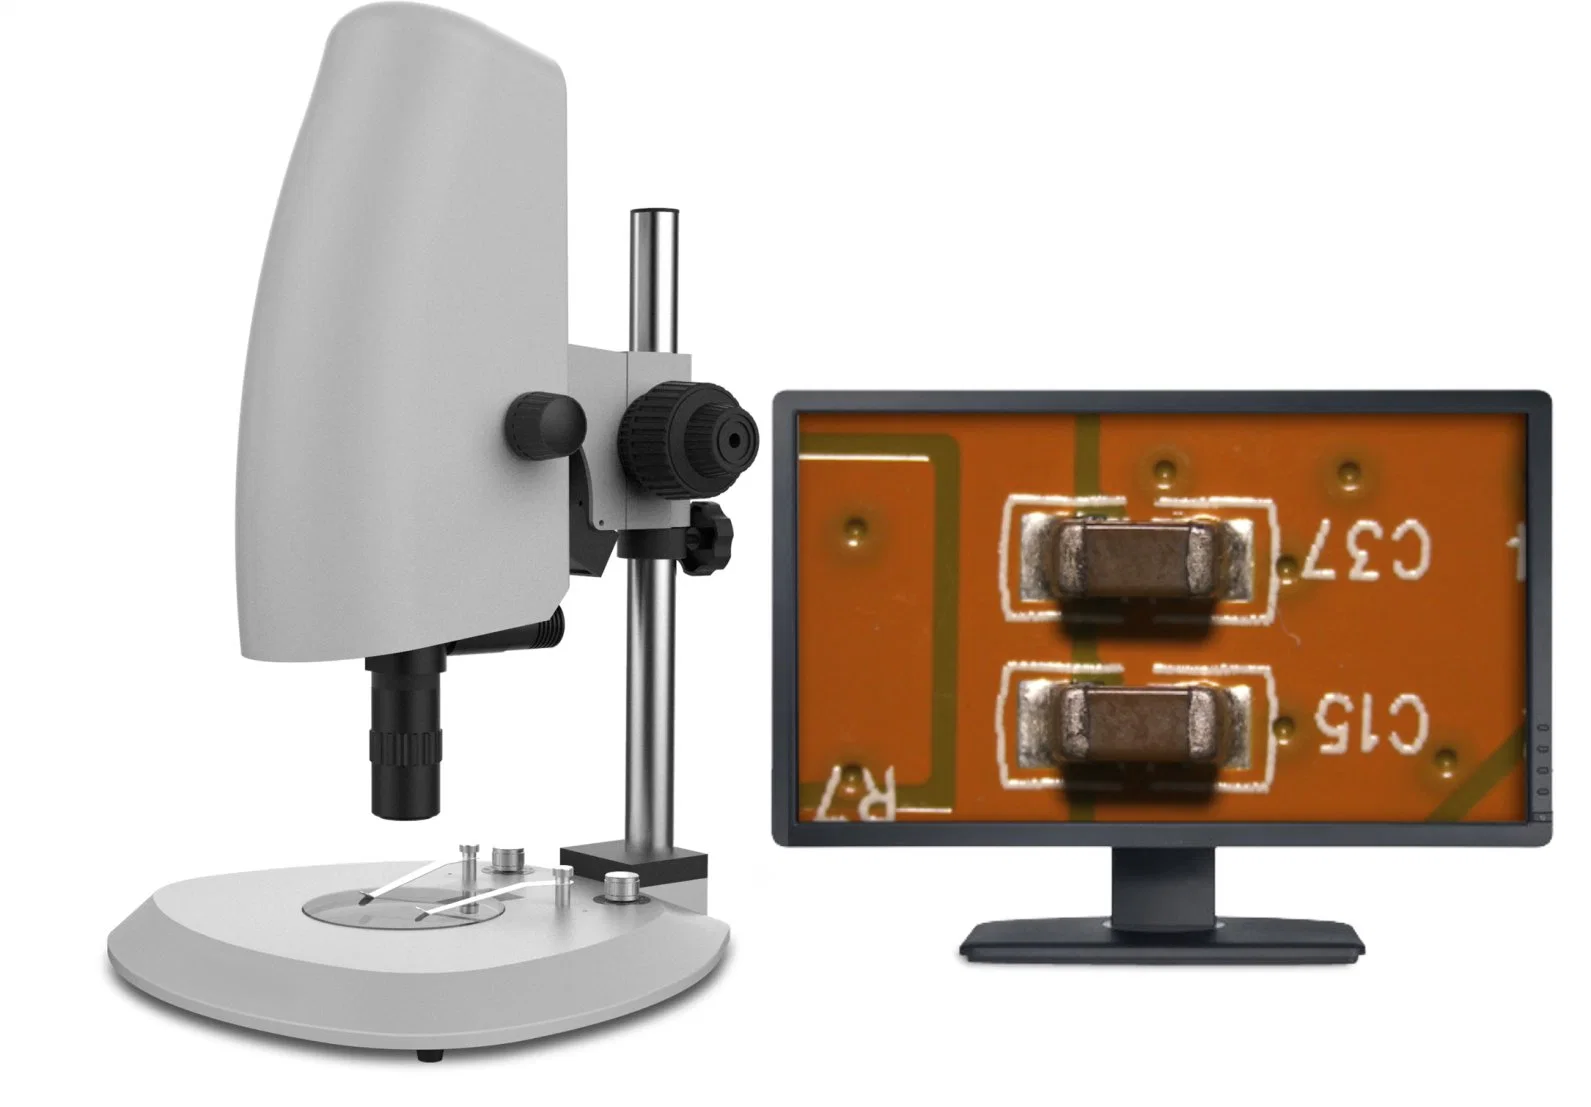 High Power High Definition Coaxial Video Microscope Calibration Free for Lab